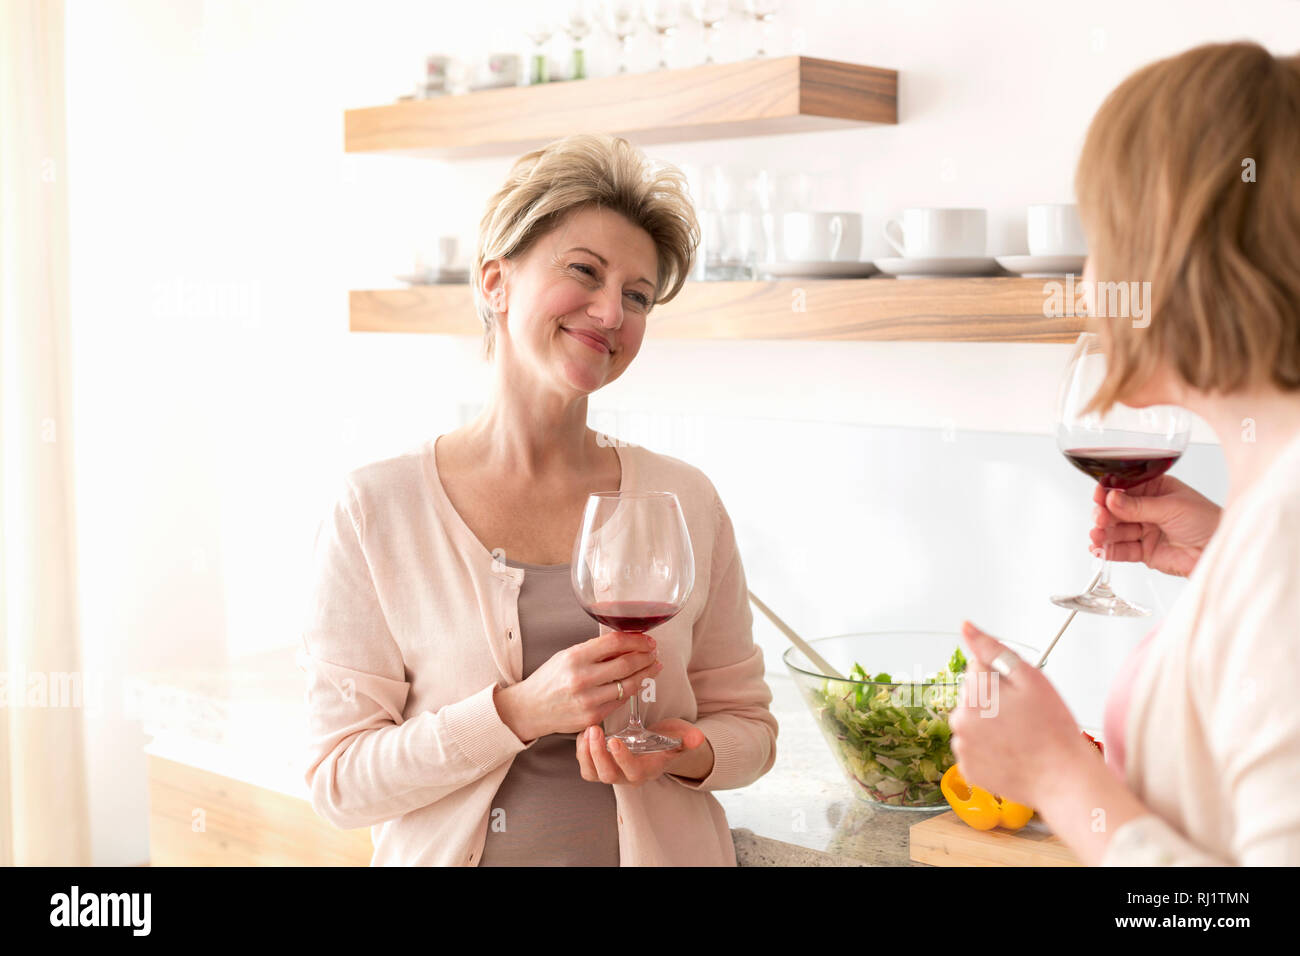 Smiling mature women holding wineglasses while standing in kitchen Stock Photo